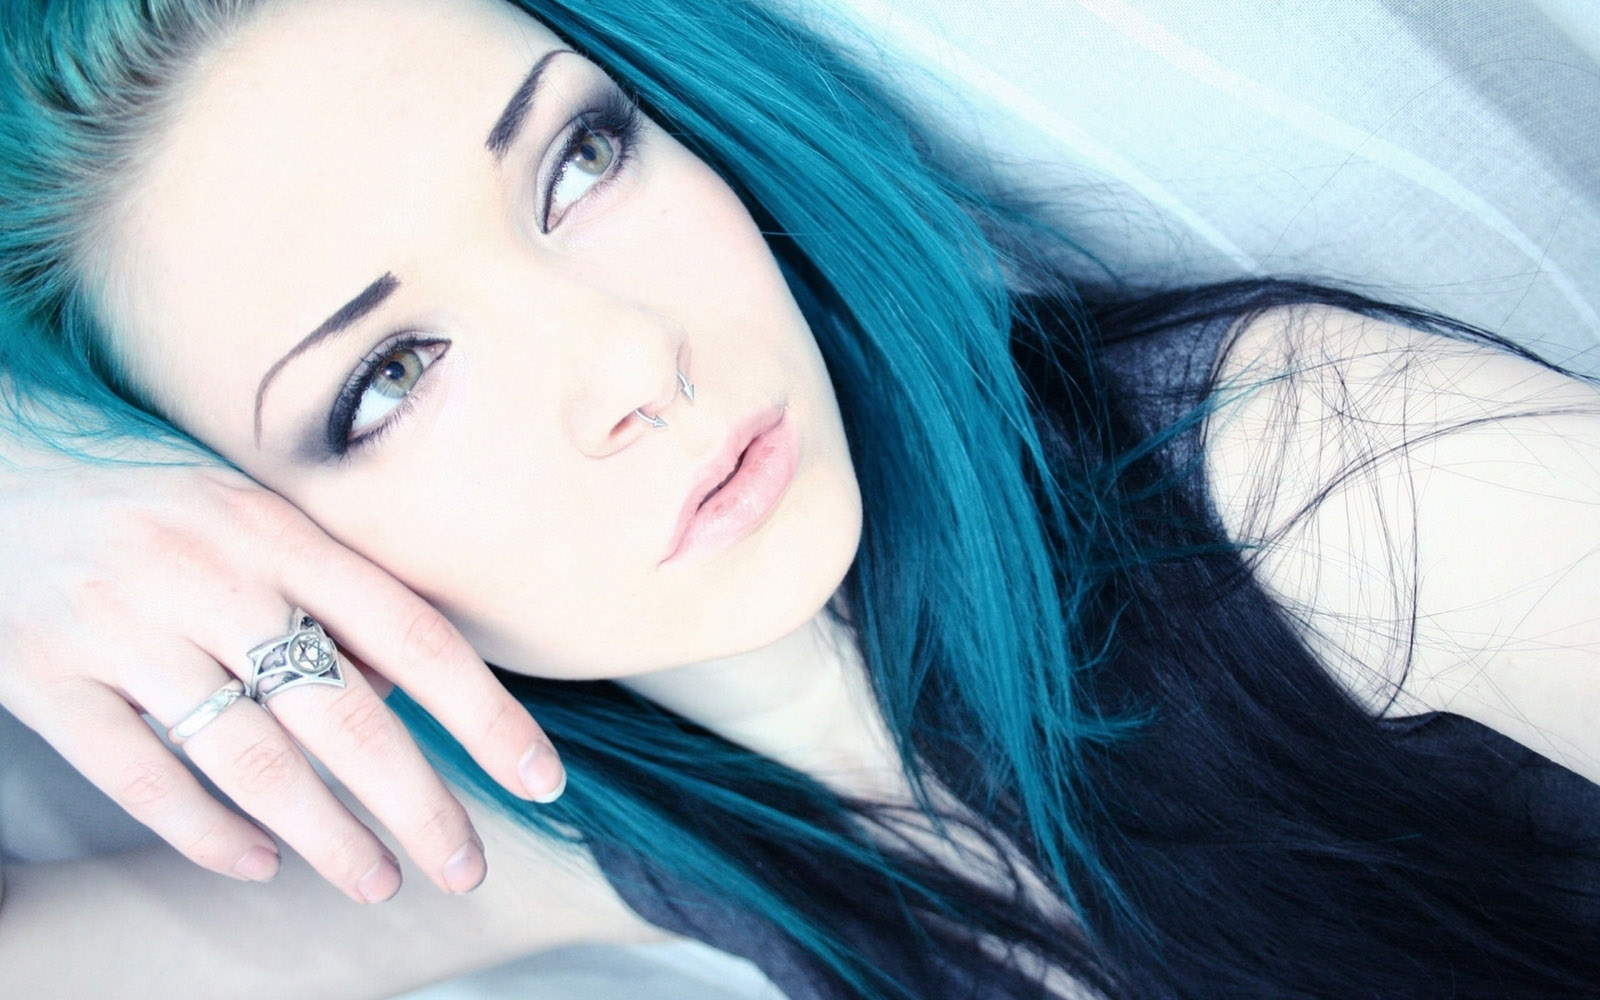 cute emo girl hd wallpaper has recently added in stylish hd wallpapers